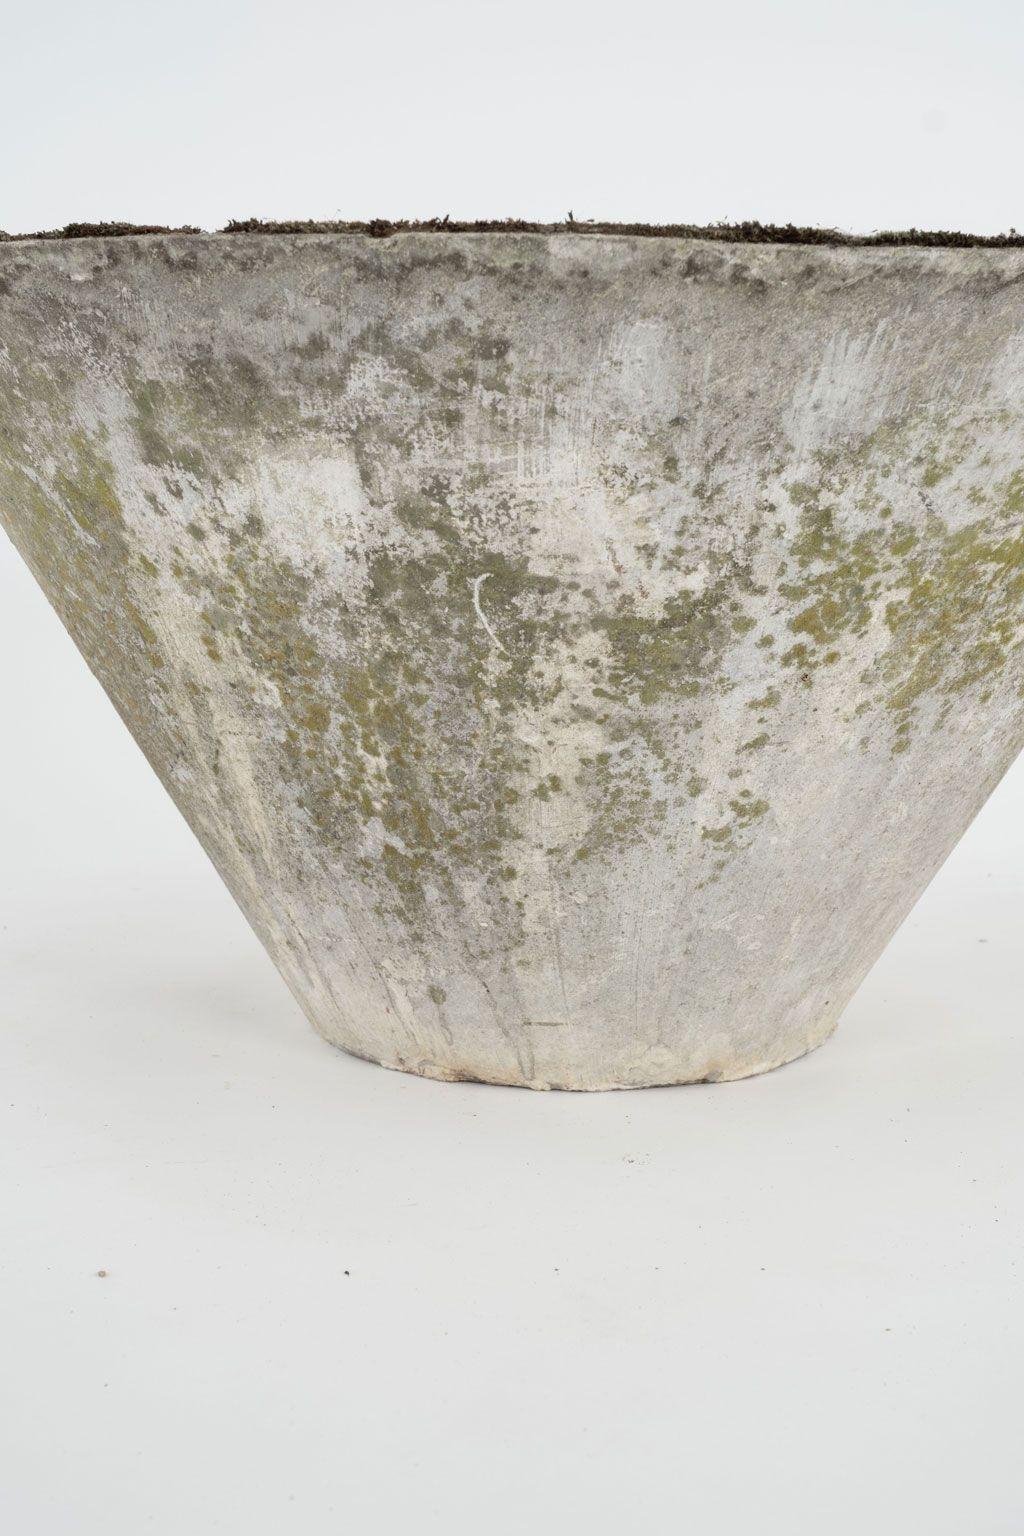 Swiss Tapered Round Concrete Willy Guhl Planter For Sale